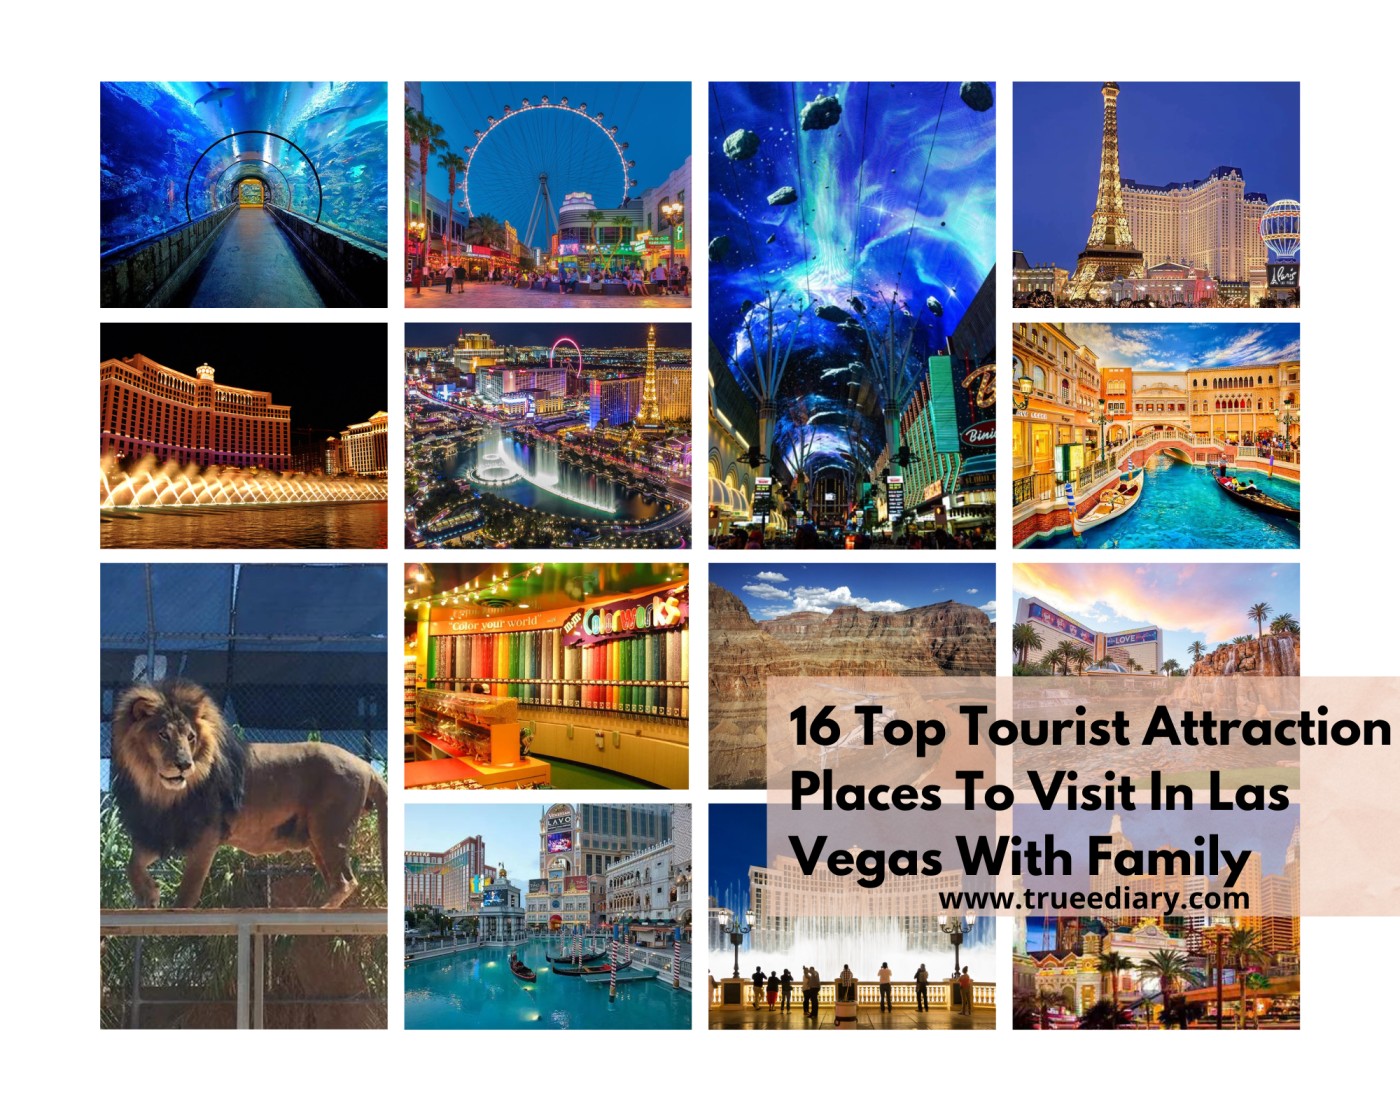 16 Top Tourist Attraction Places To Visit In Las Vegas With Family